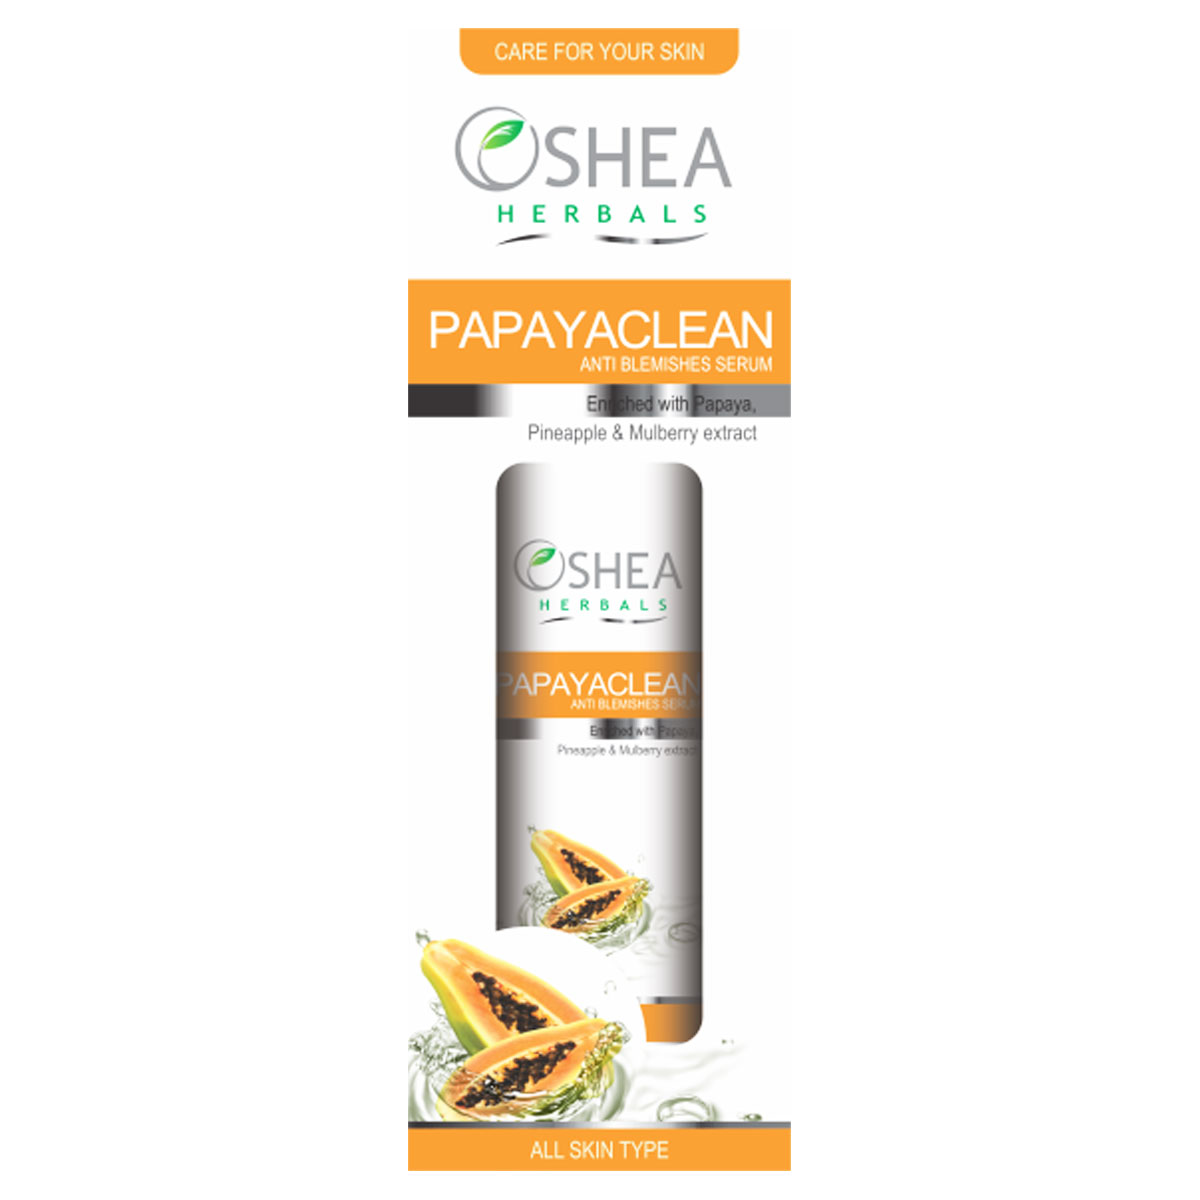 Bengal Shopping - One Life to Live - One Store to Shop | Oshea Herbals  Papayaclean, Anti Blemishes Serum - 50 ml